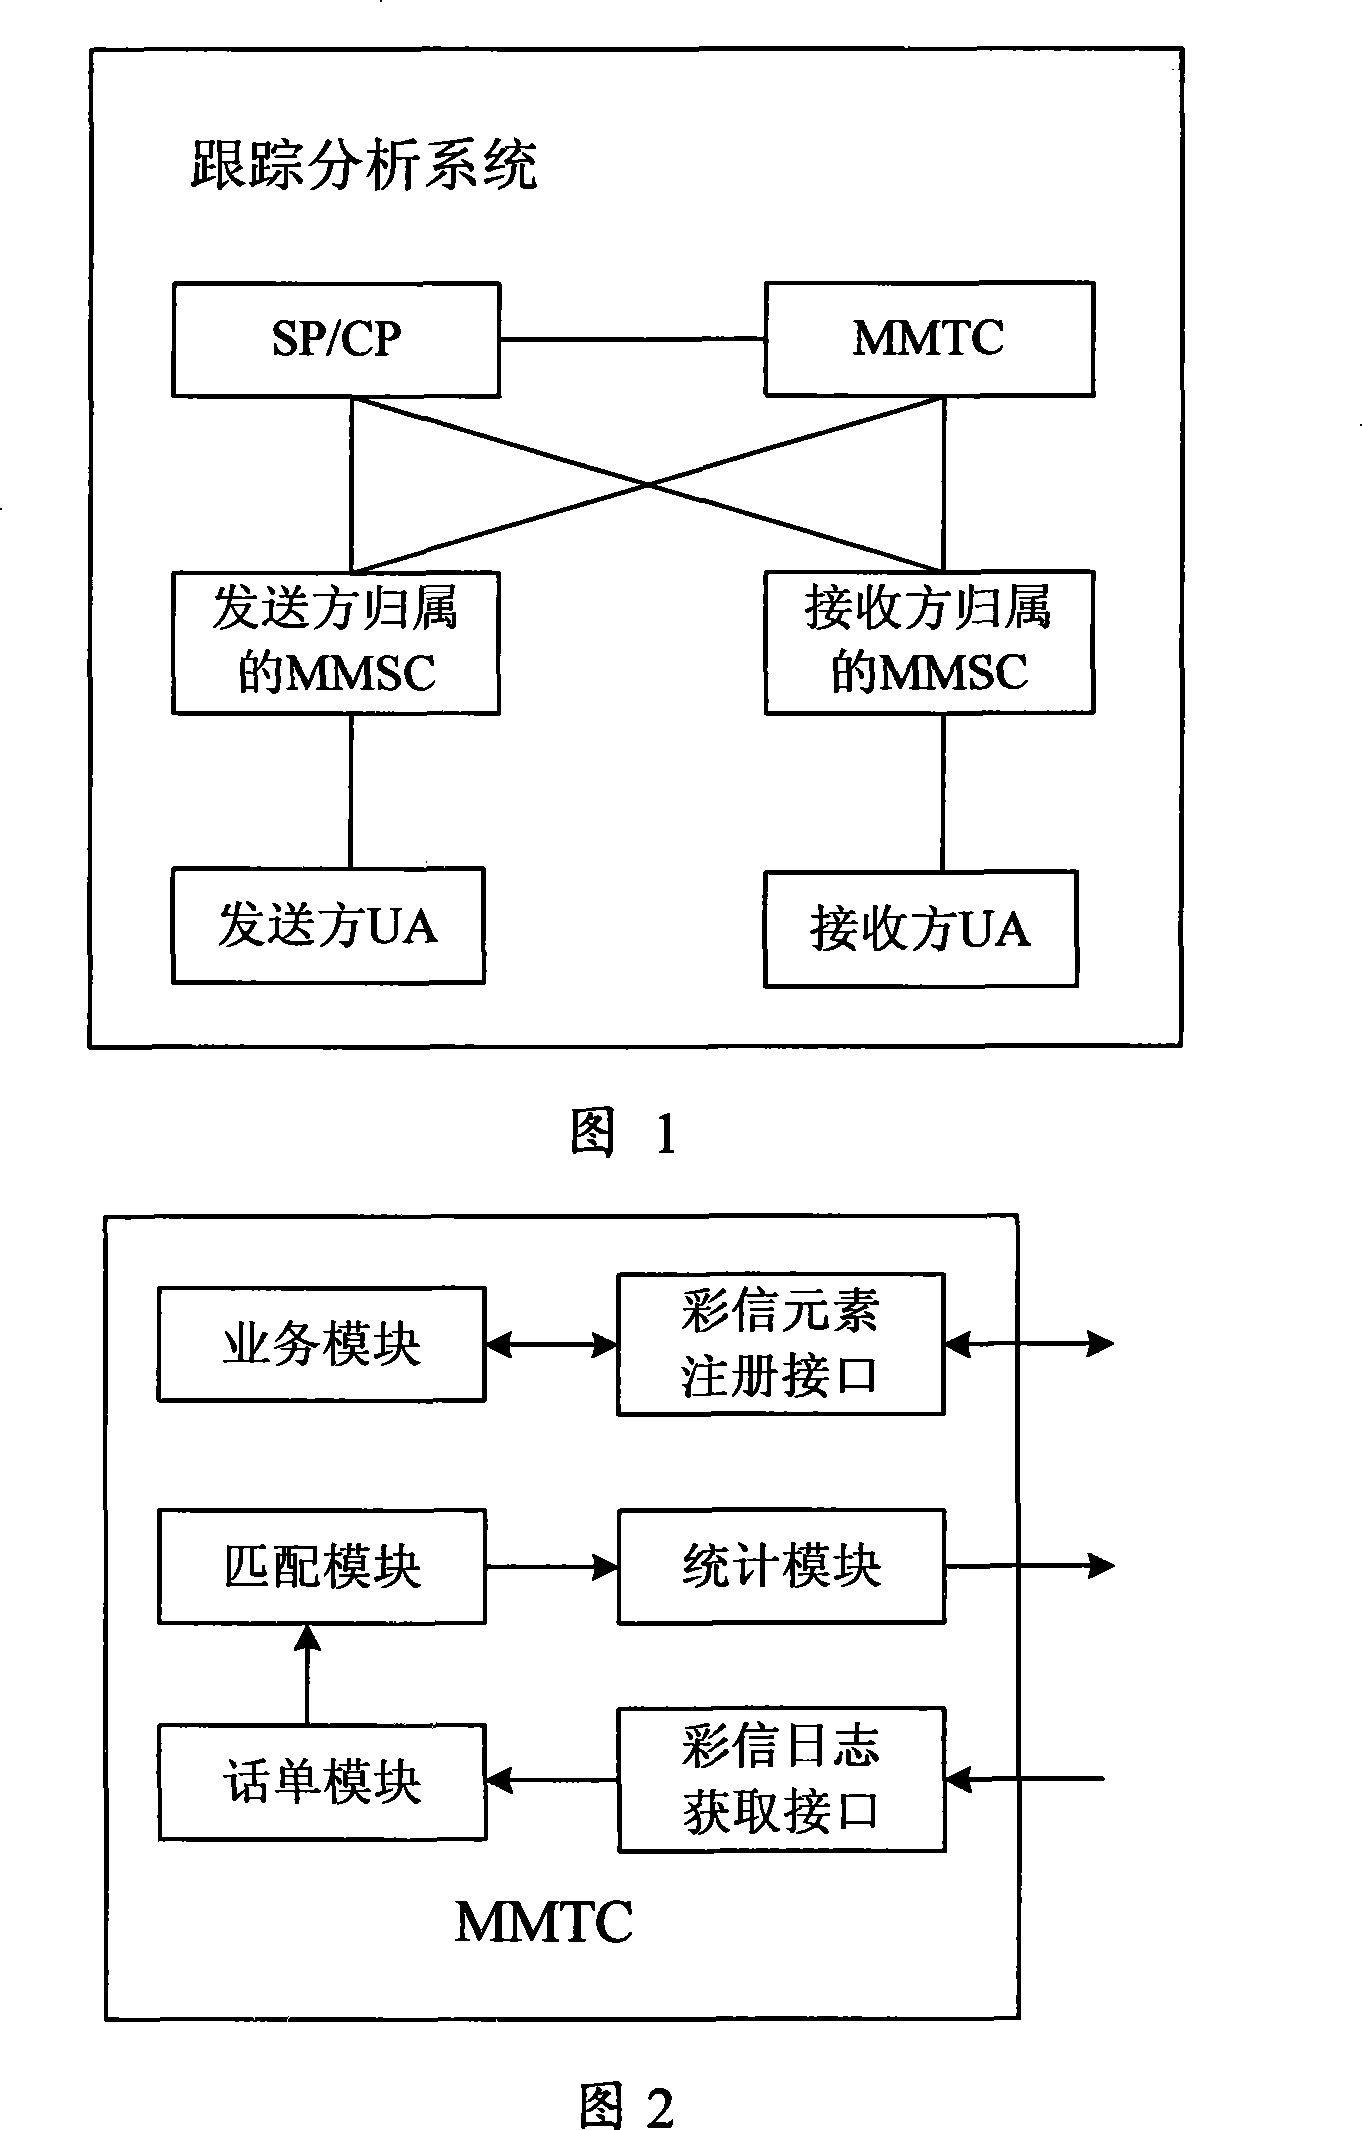 MMS element tracing analysis system and method